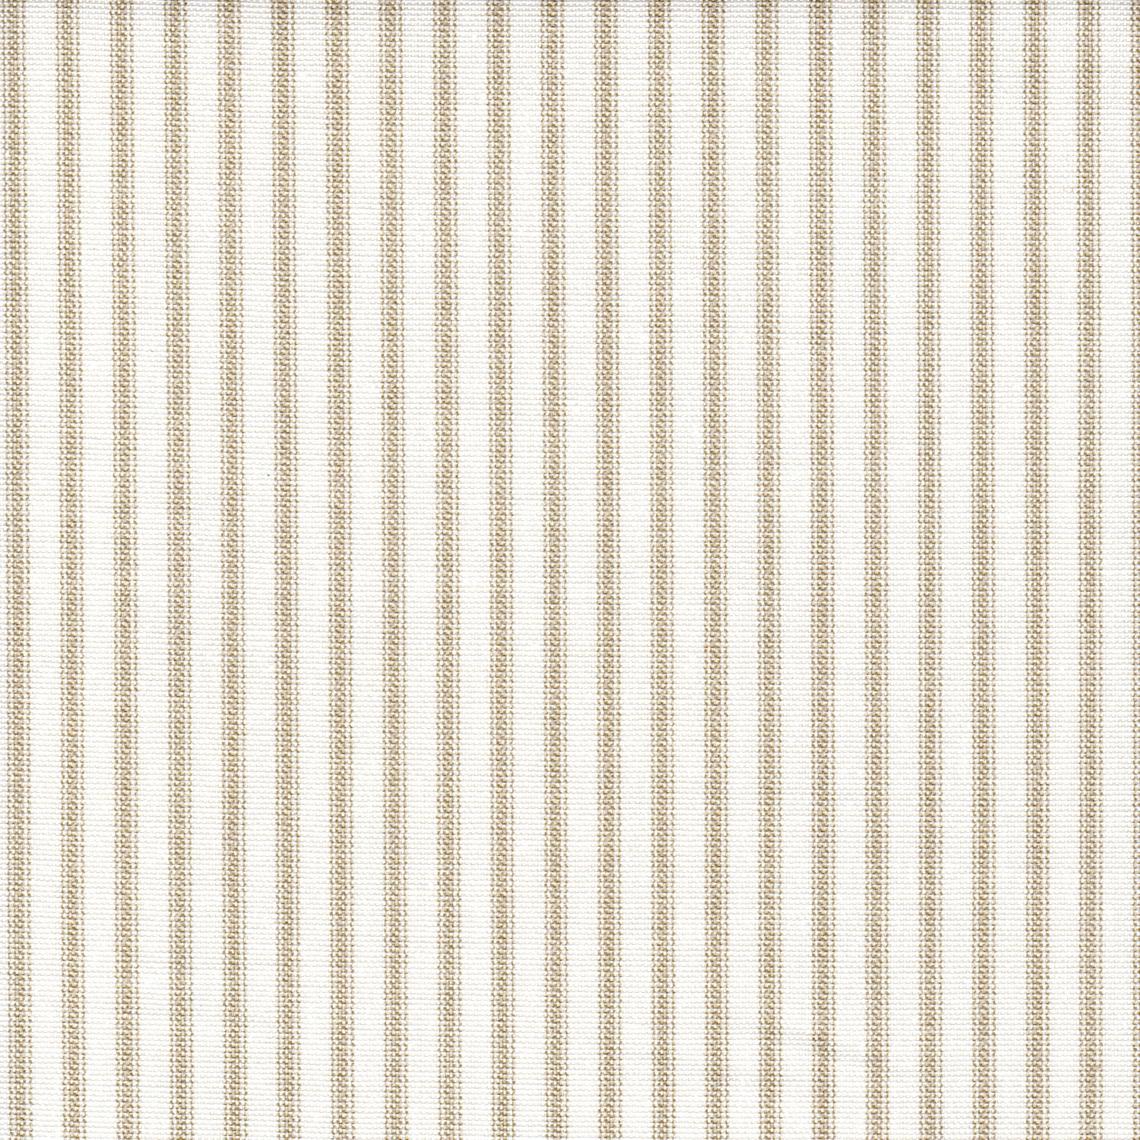 pinch pleated curtains in farmhouse sand beige traditional ticking stripe